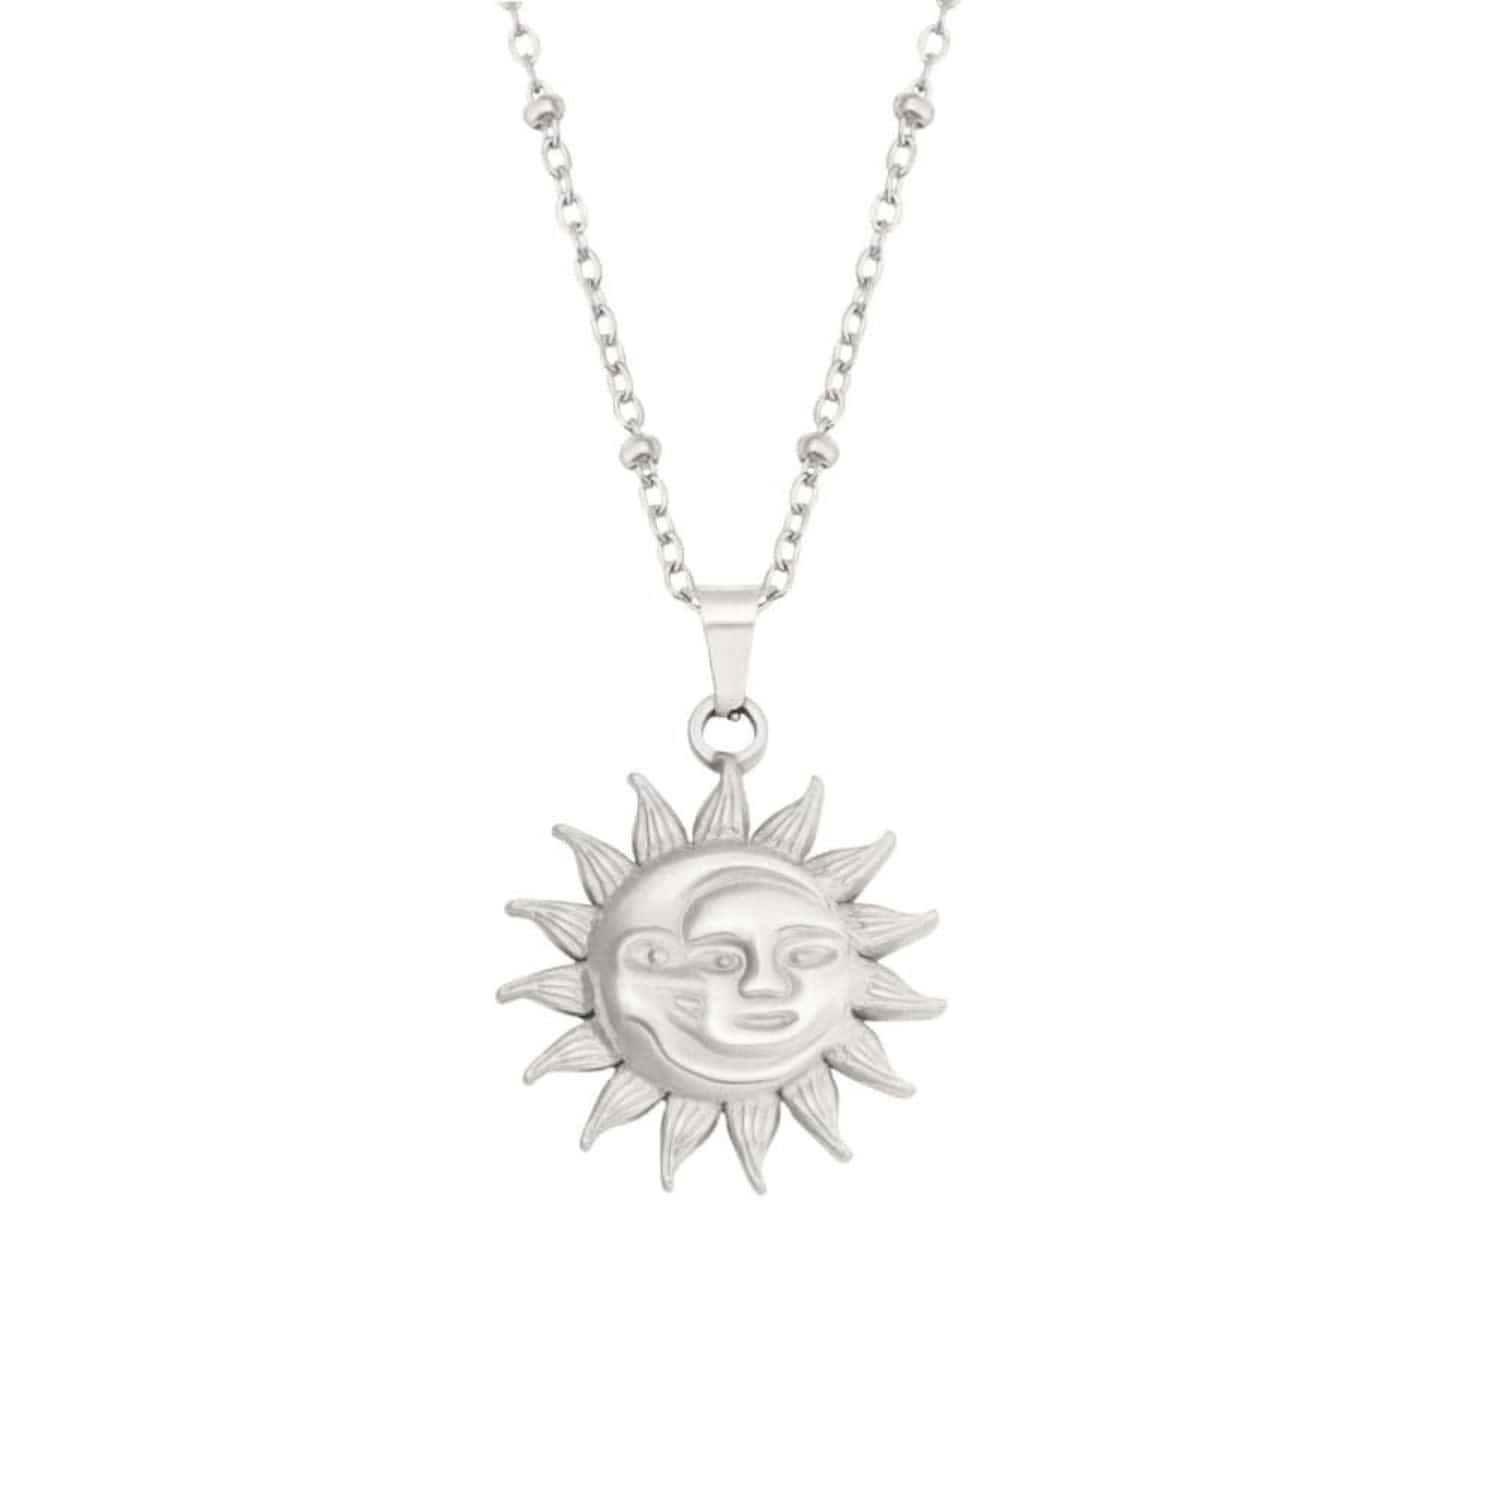 BohoMoon Stainless Steel Magic Hour Necklace Silver